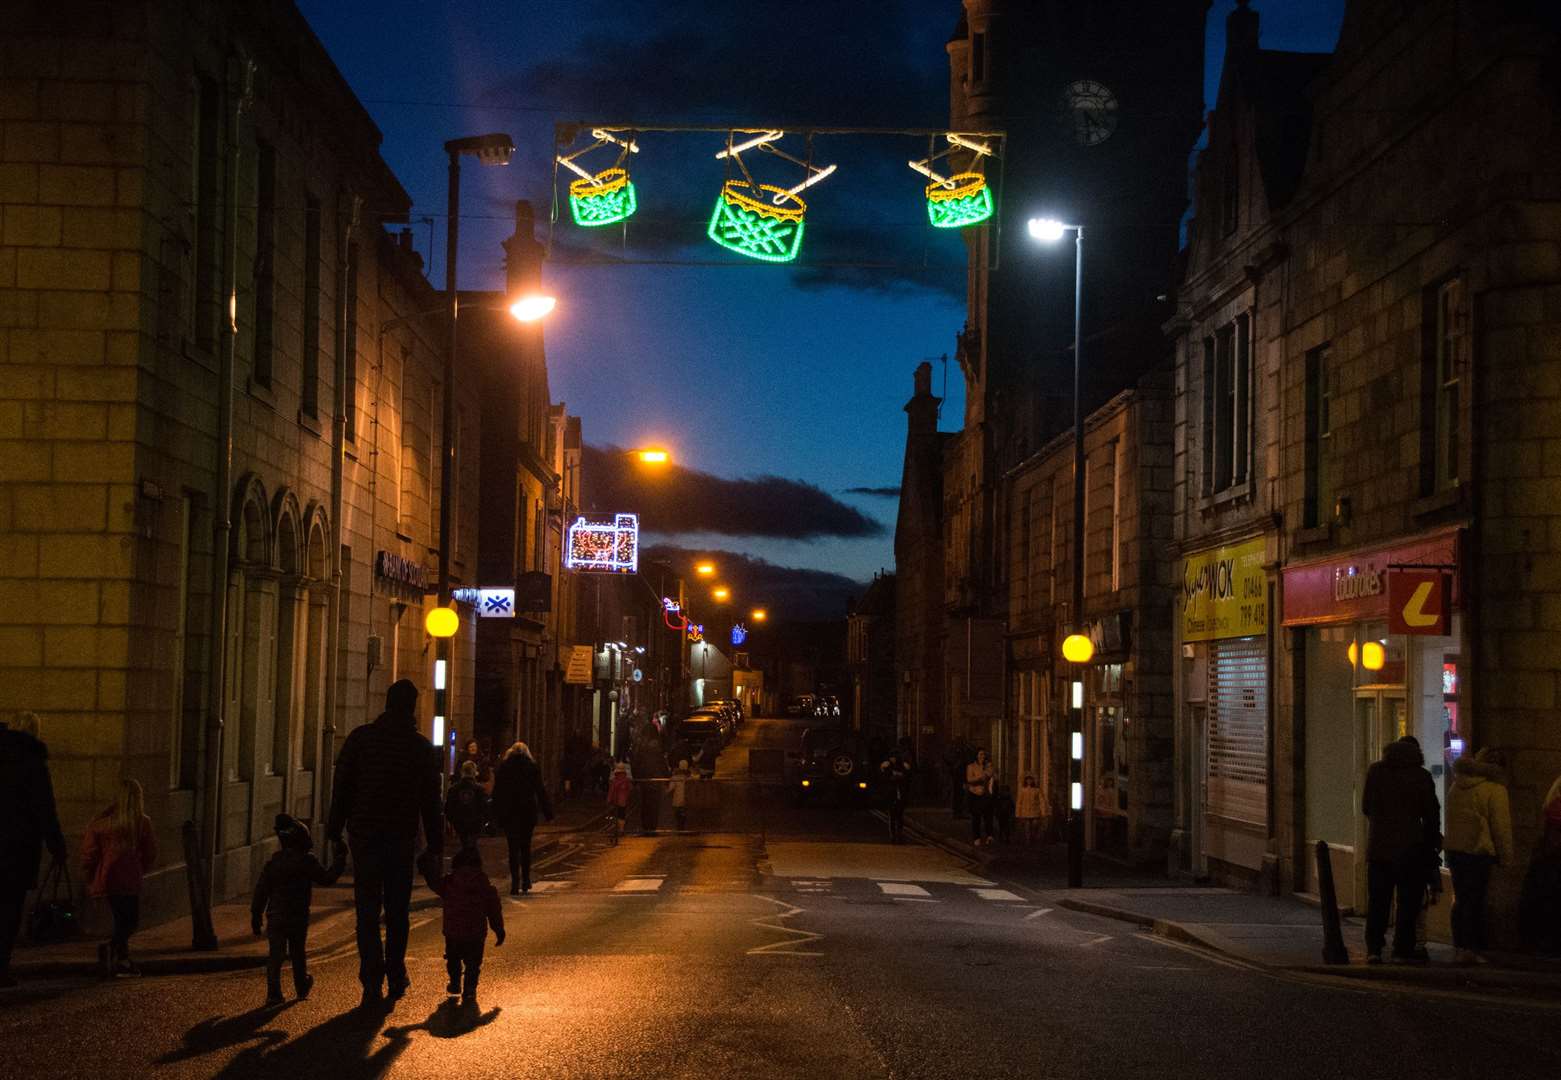 A previous year's Huntly Christmas lights shining bright.